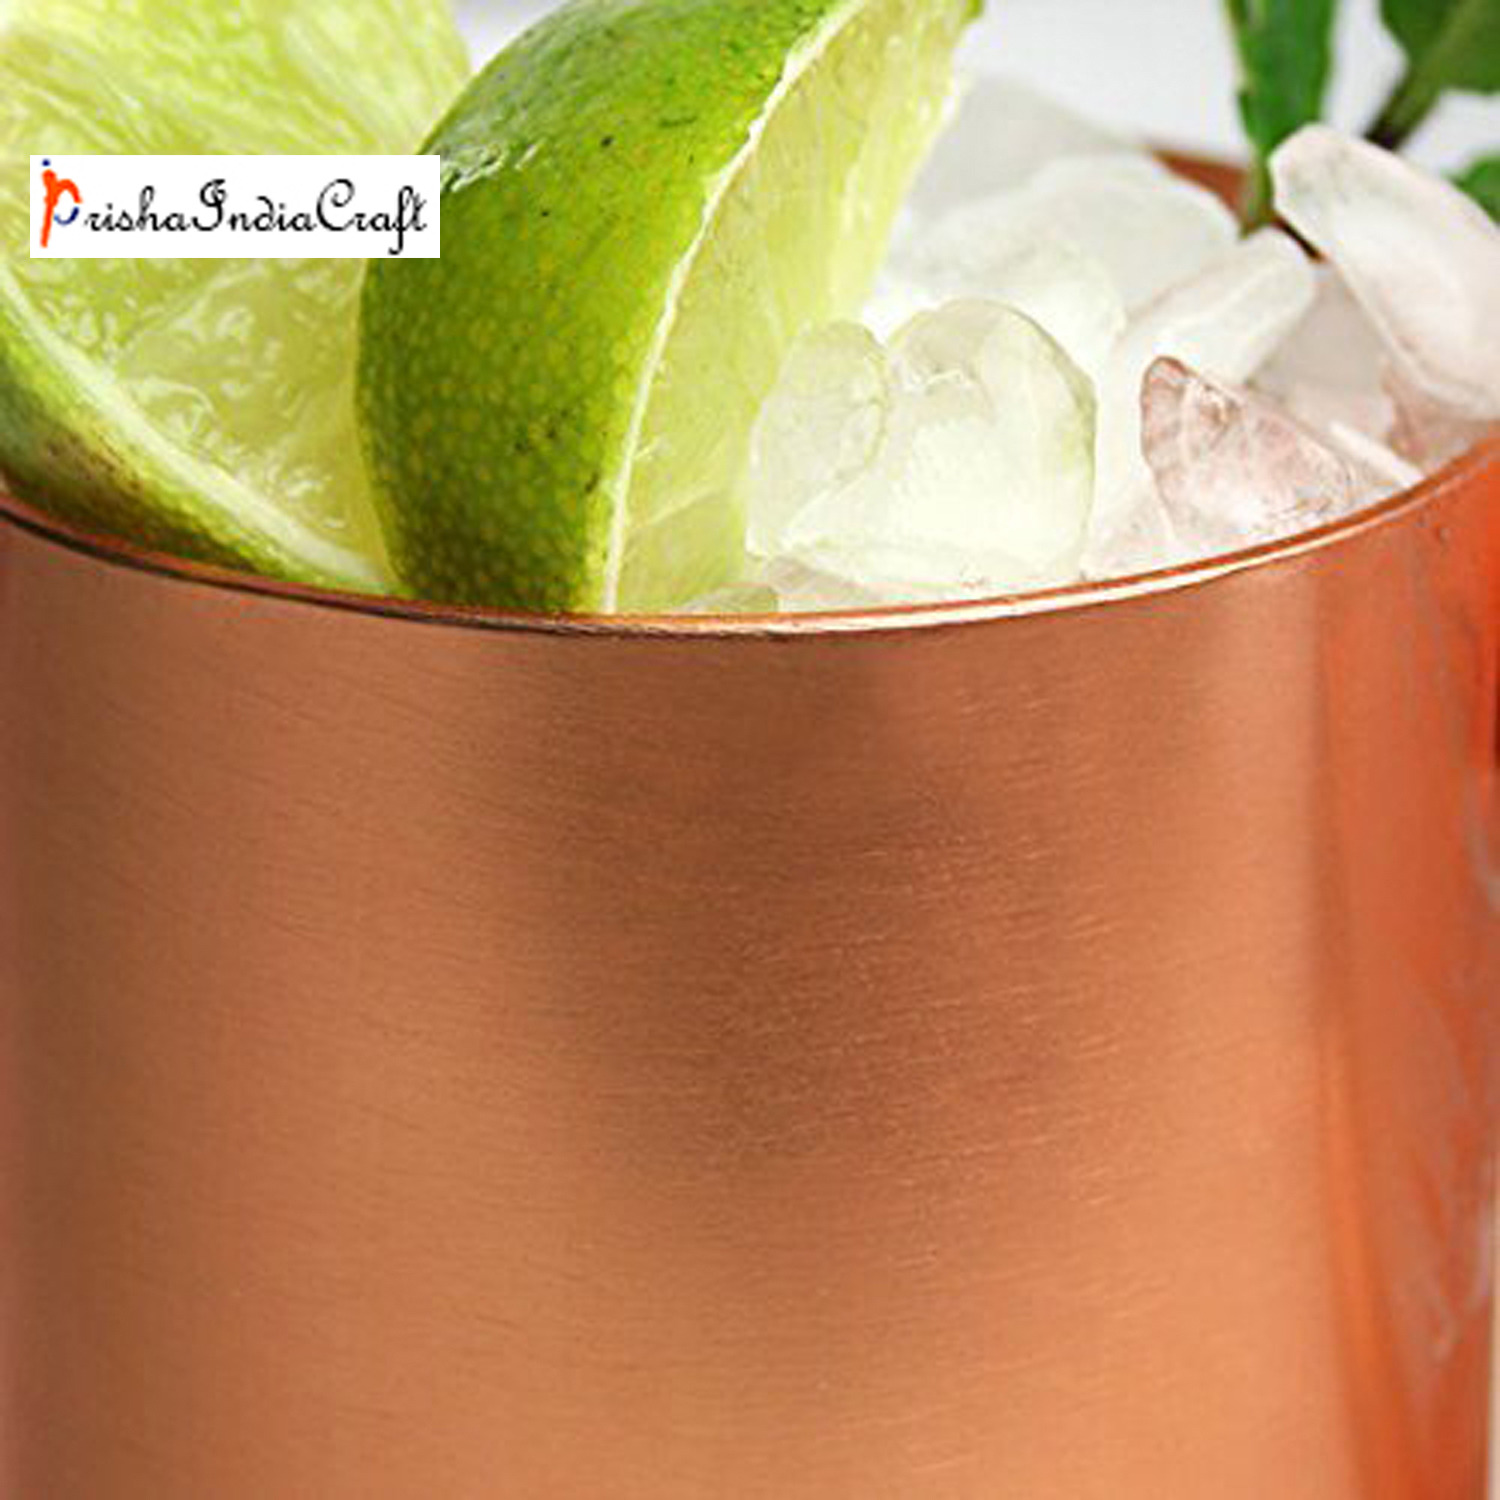 Set of 6 - Prisha India Craft B. Copper Mug for Moscow Mules 450 Ml / 15 Oz - 100% Pure Copper - Lacquered Finish - Solid Copper Best Quality Moscow Mule Mug, Cocktail Cup, Copper Mugs, Cocktail Mugs